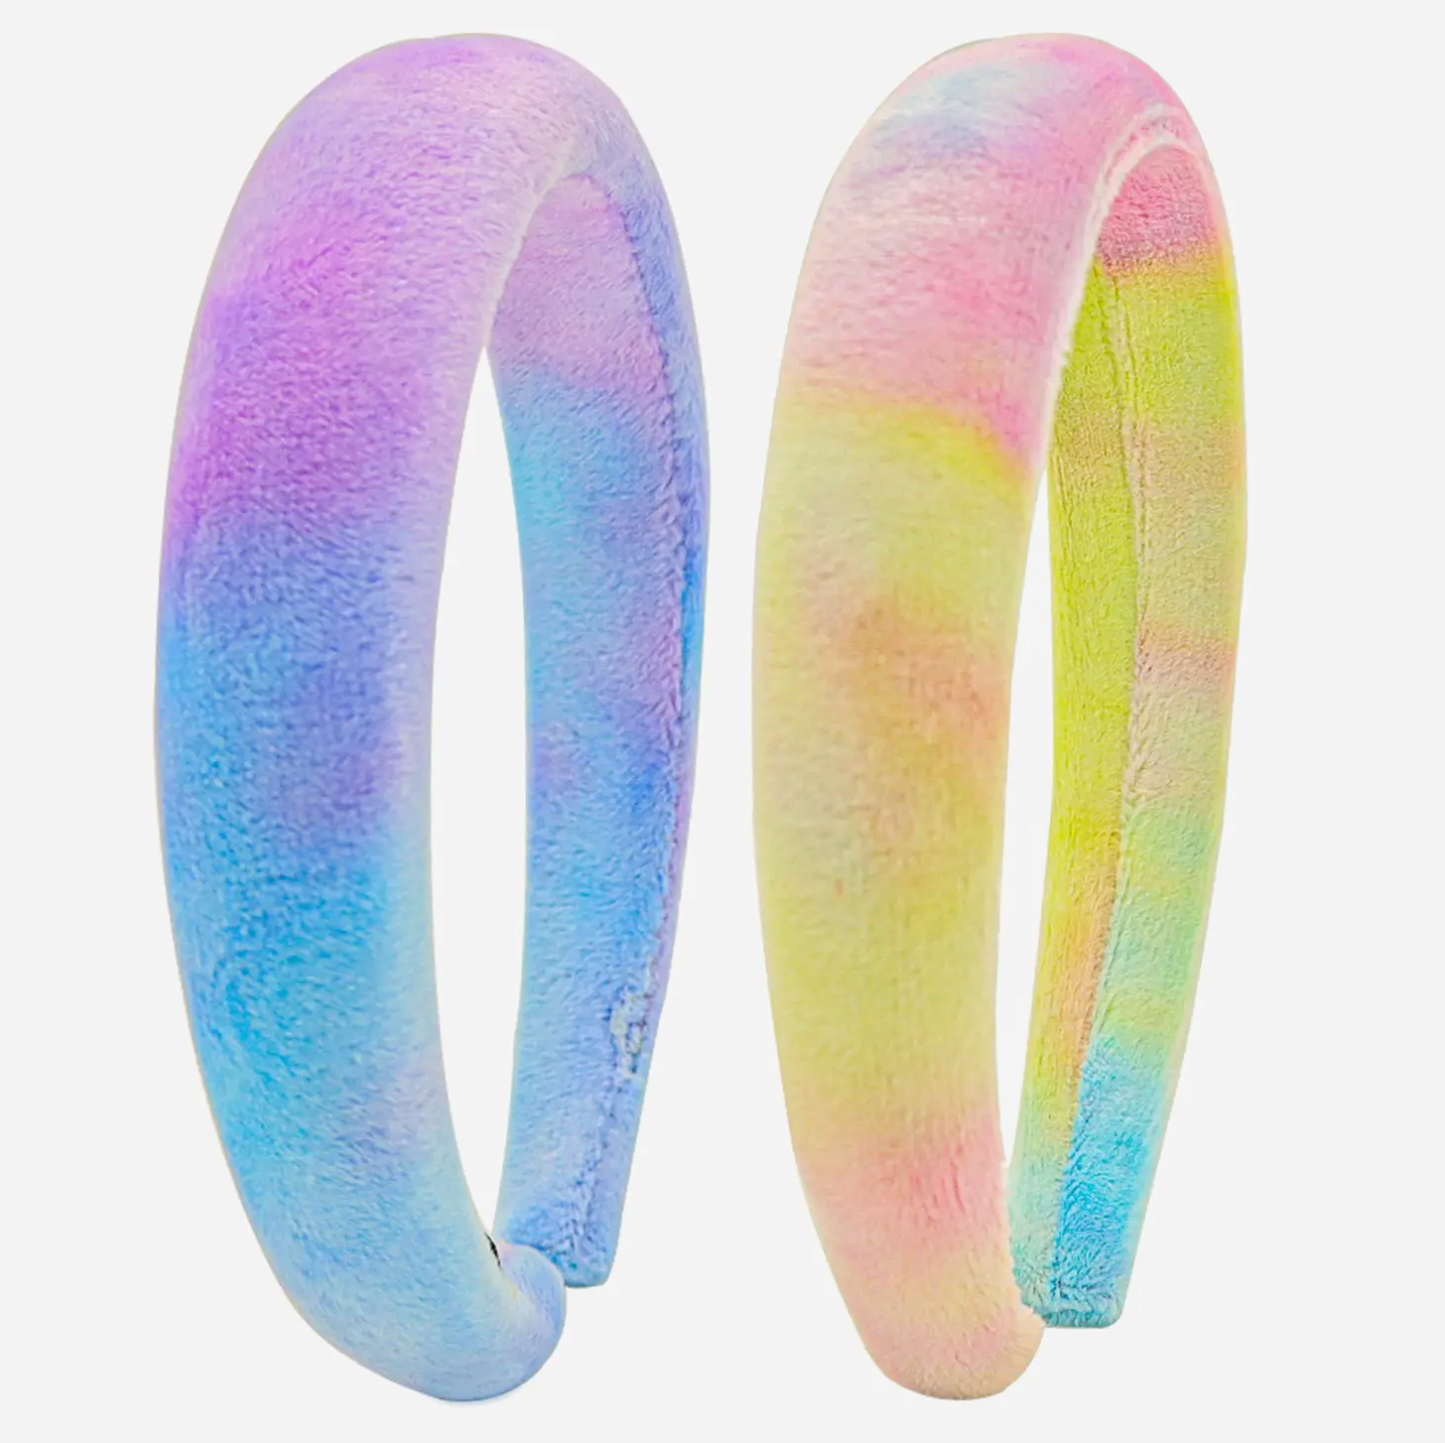 Soft Padded Tie-Dye Headband, 2 colors - Magpies Paducah